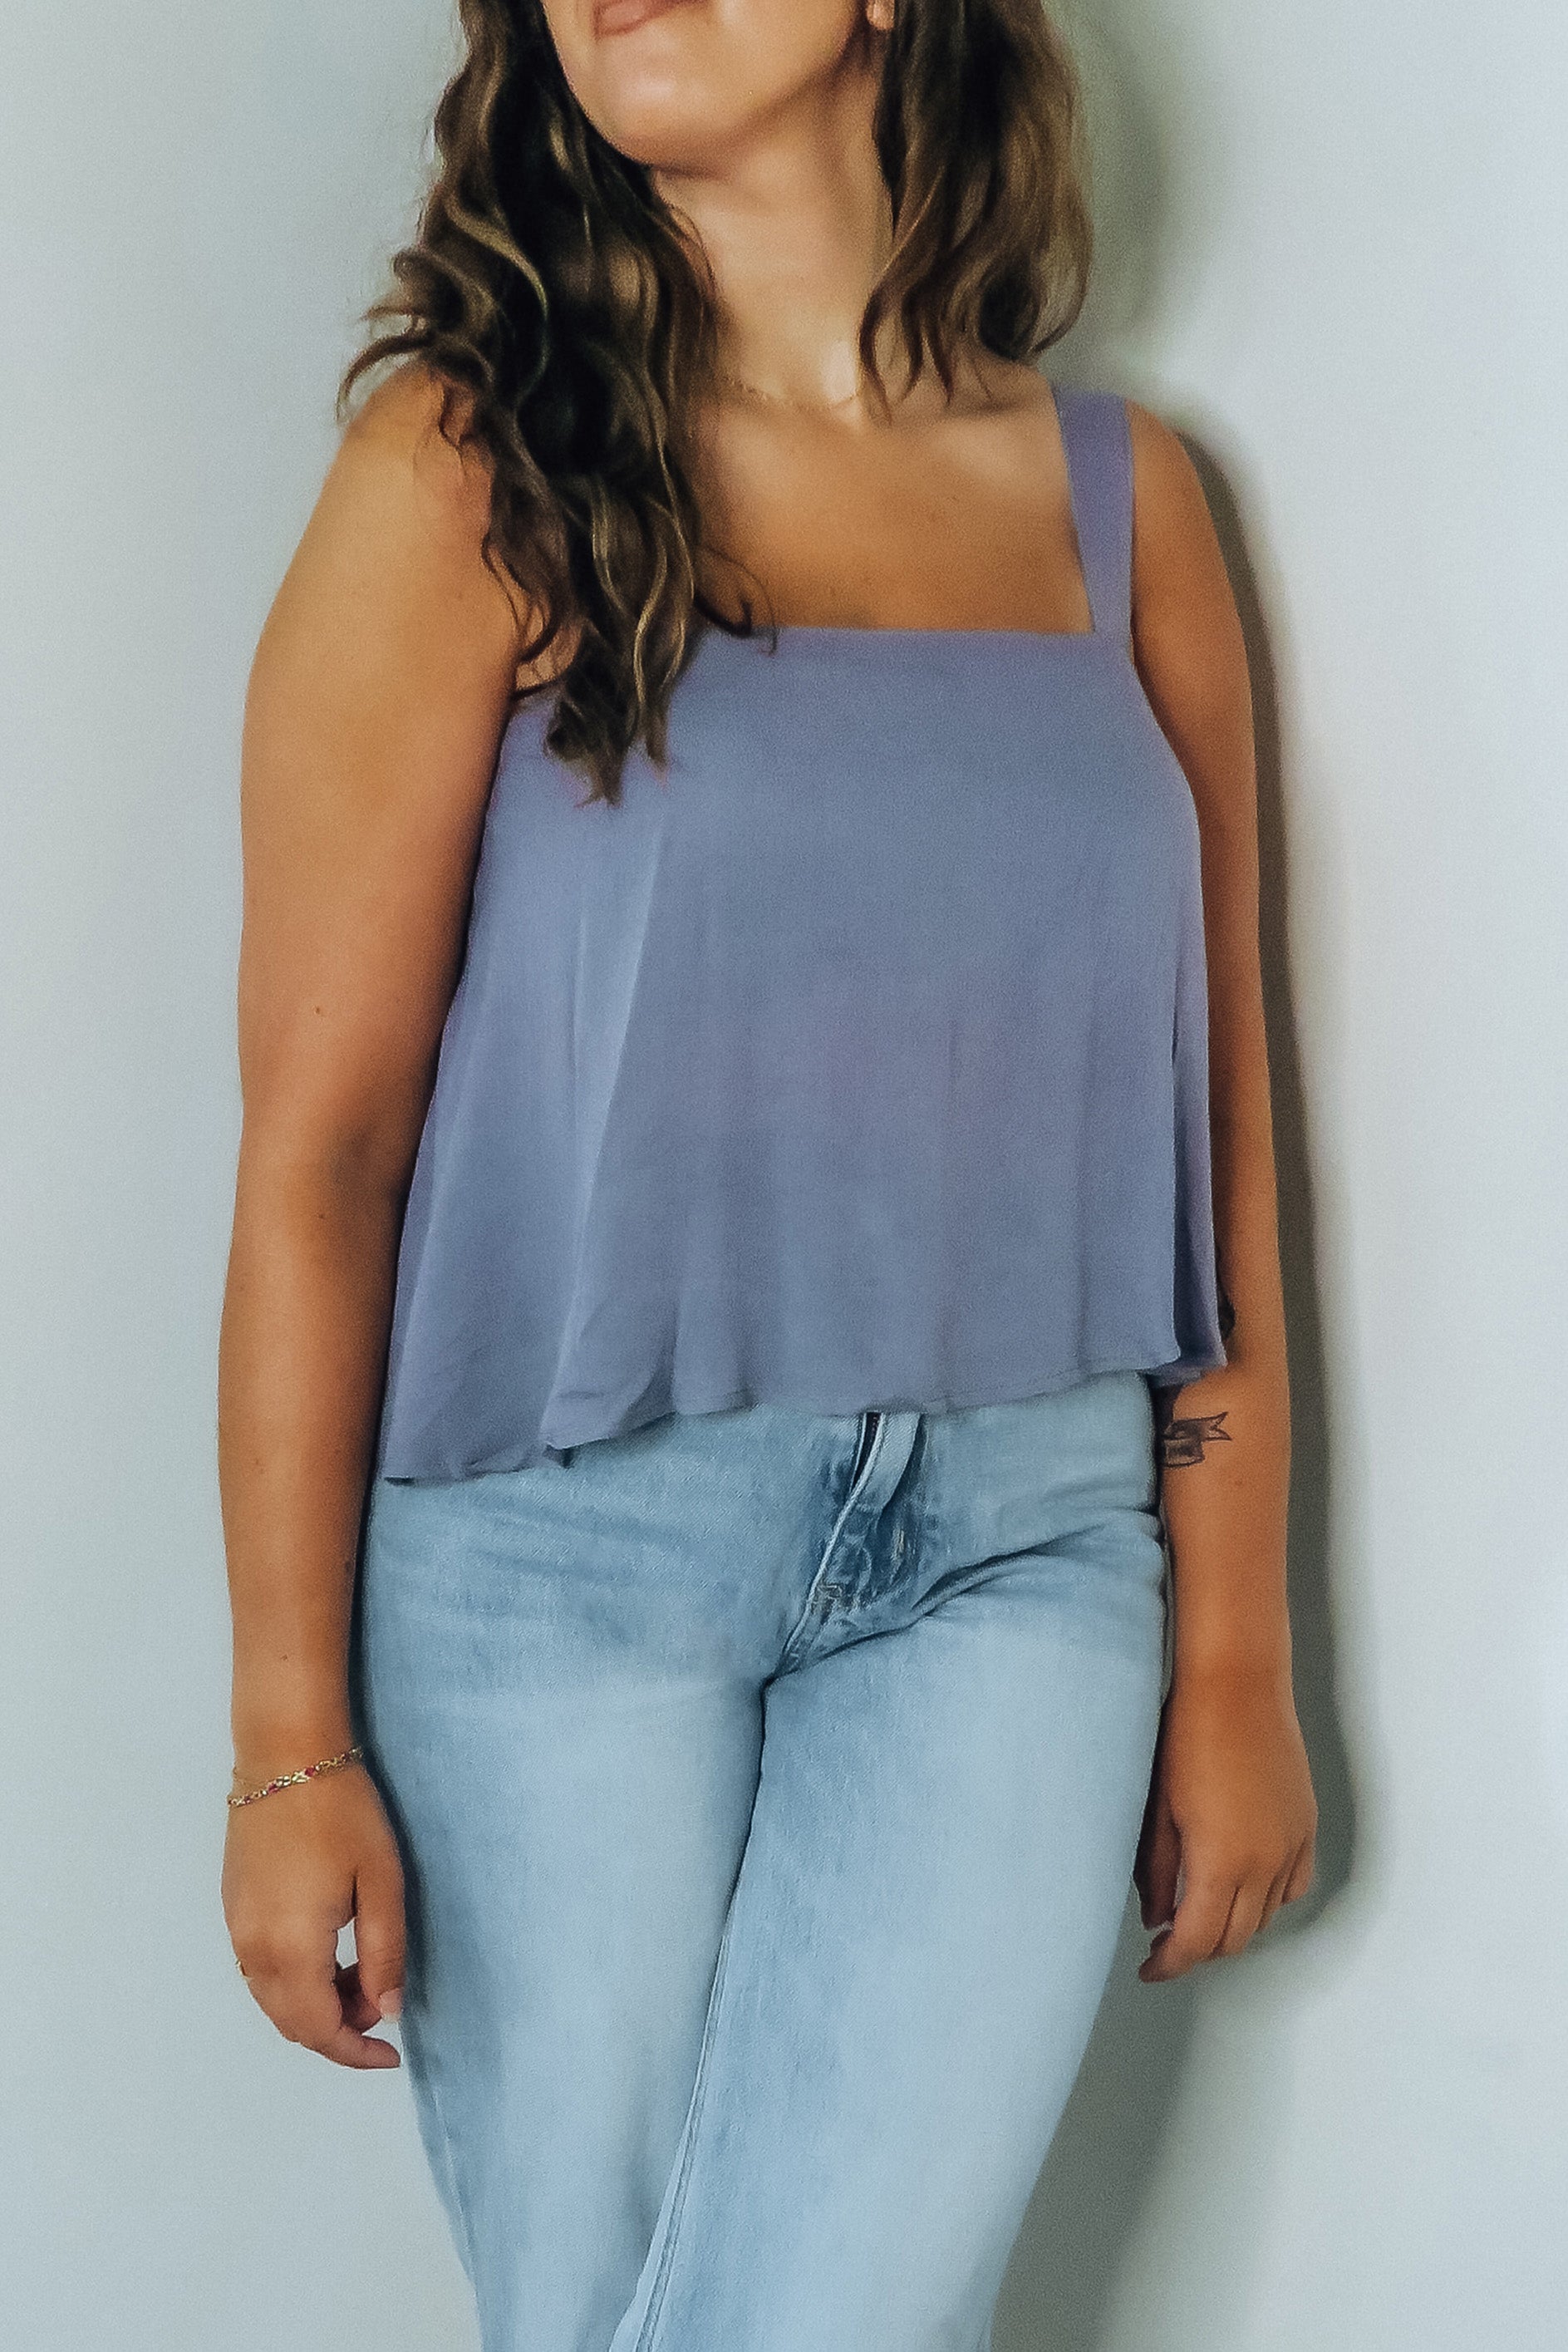 Flowy Square-Neck Tank Top With Built-In Bra - Shirts & Tops - The Green Brick Boutique